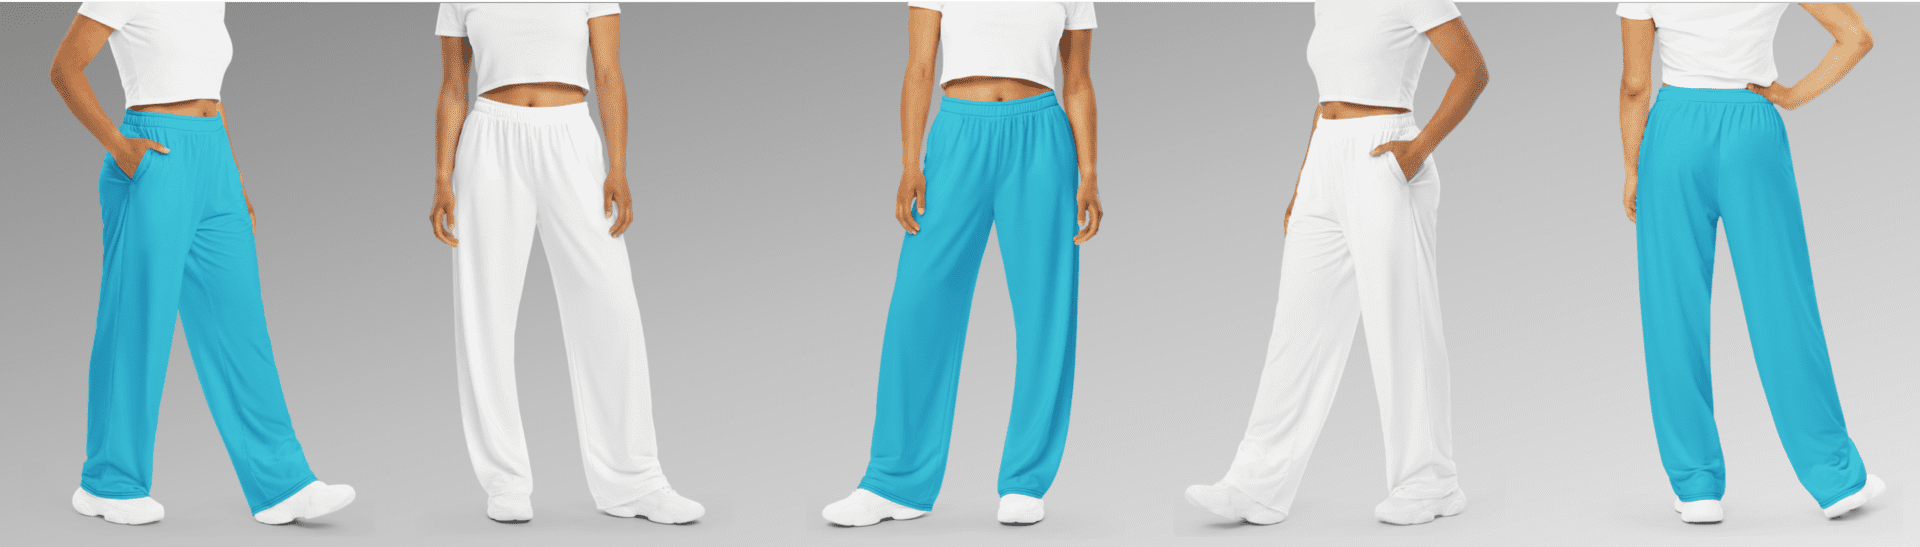 Women wearing white and blue pants.